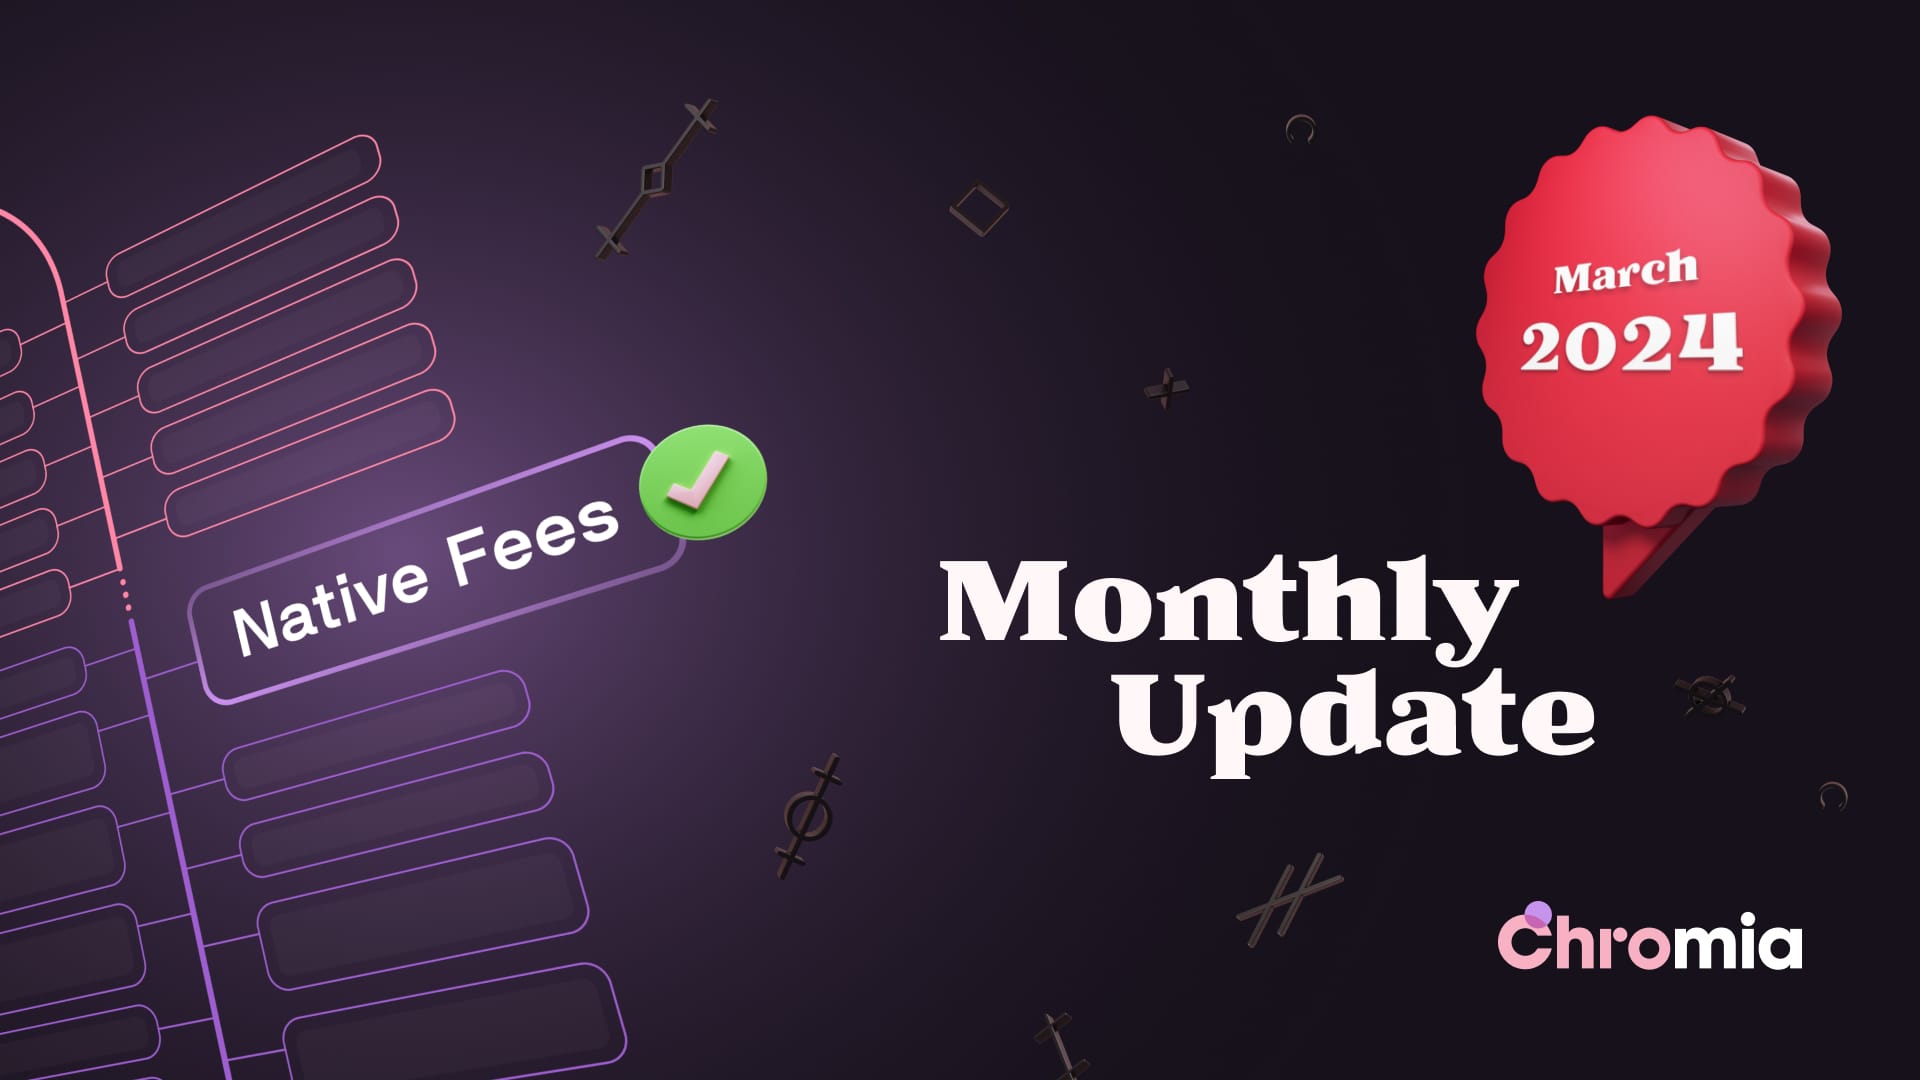 Chromia Monthly Update March 2024: Native Fees Complete!